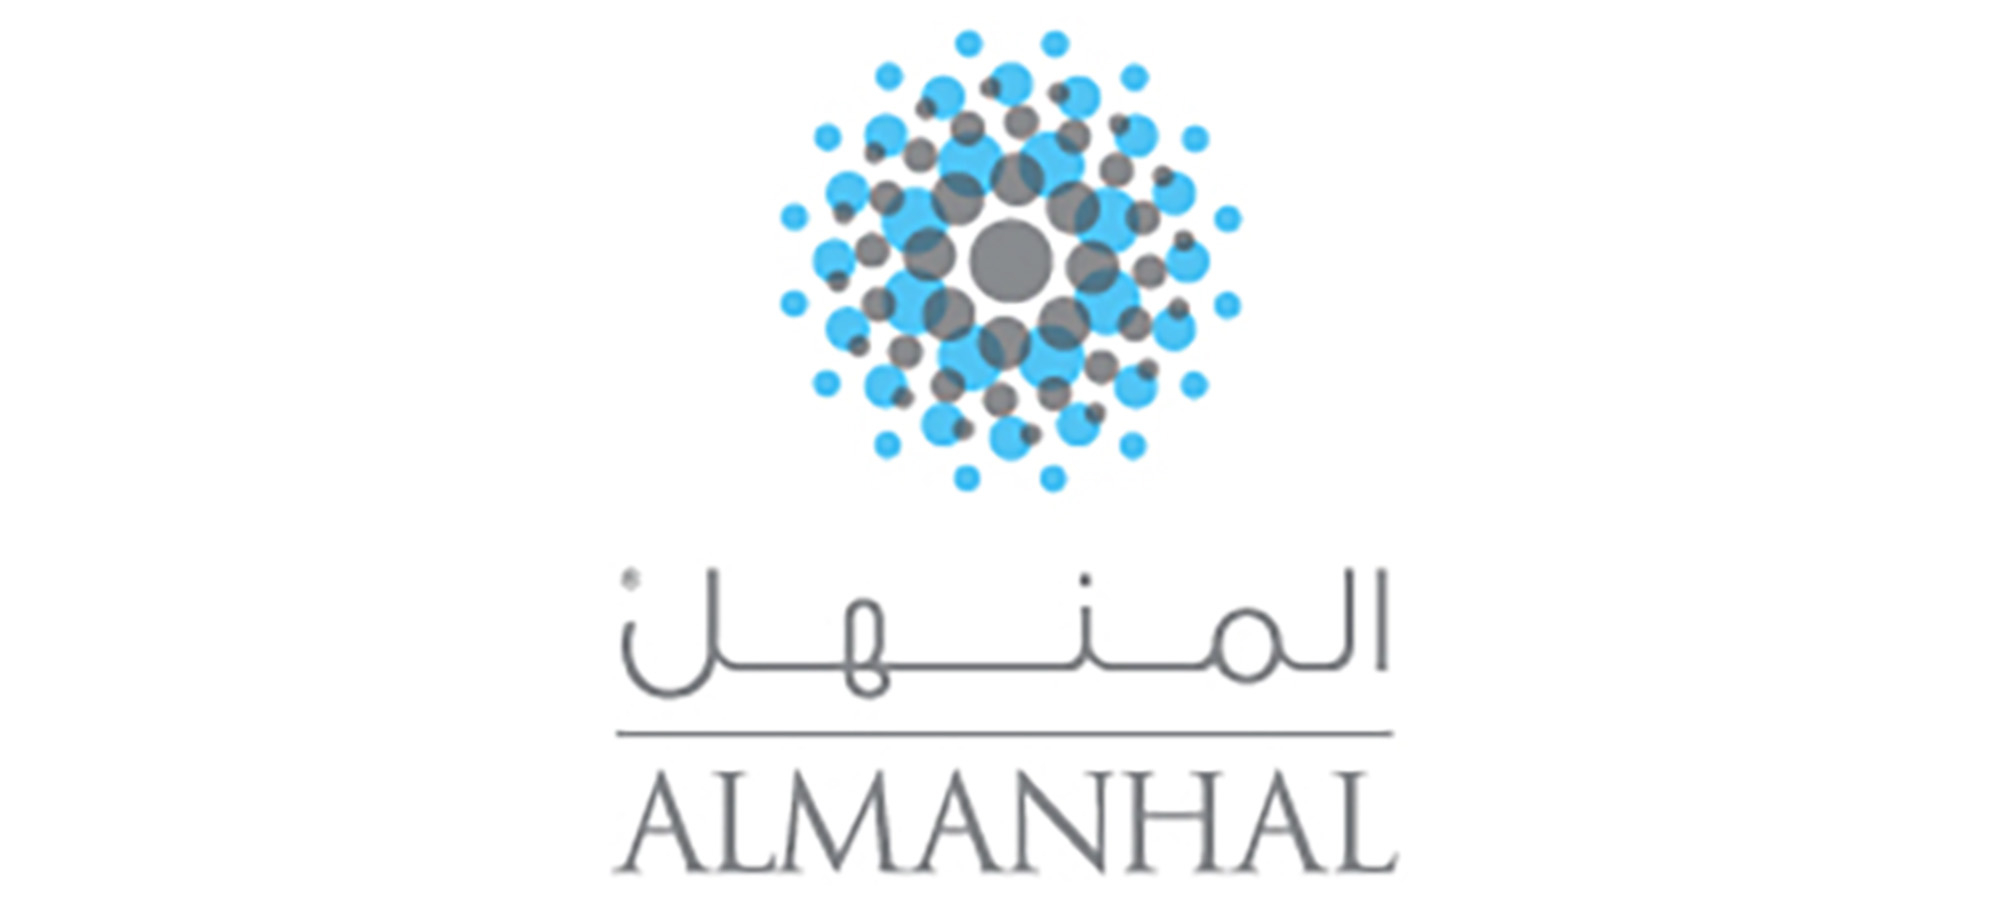 The Center enters into a partnership agreement with Al Manhal Company (July 2016)